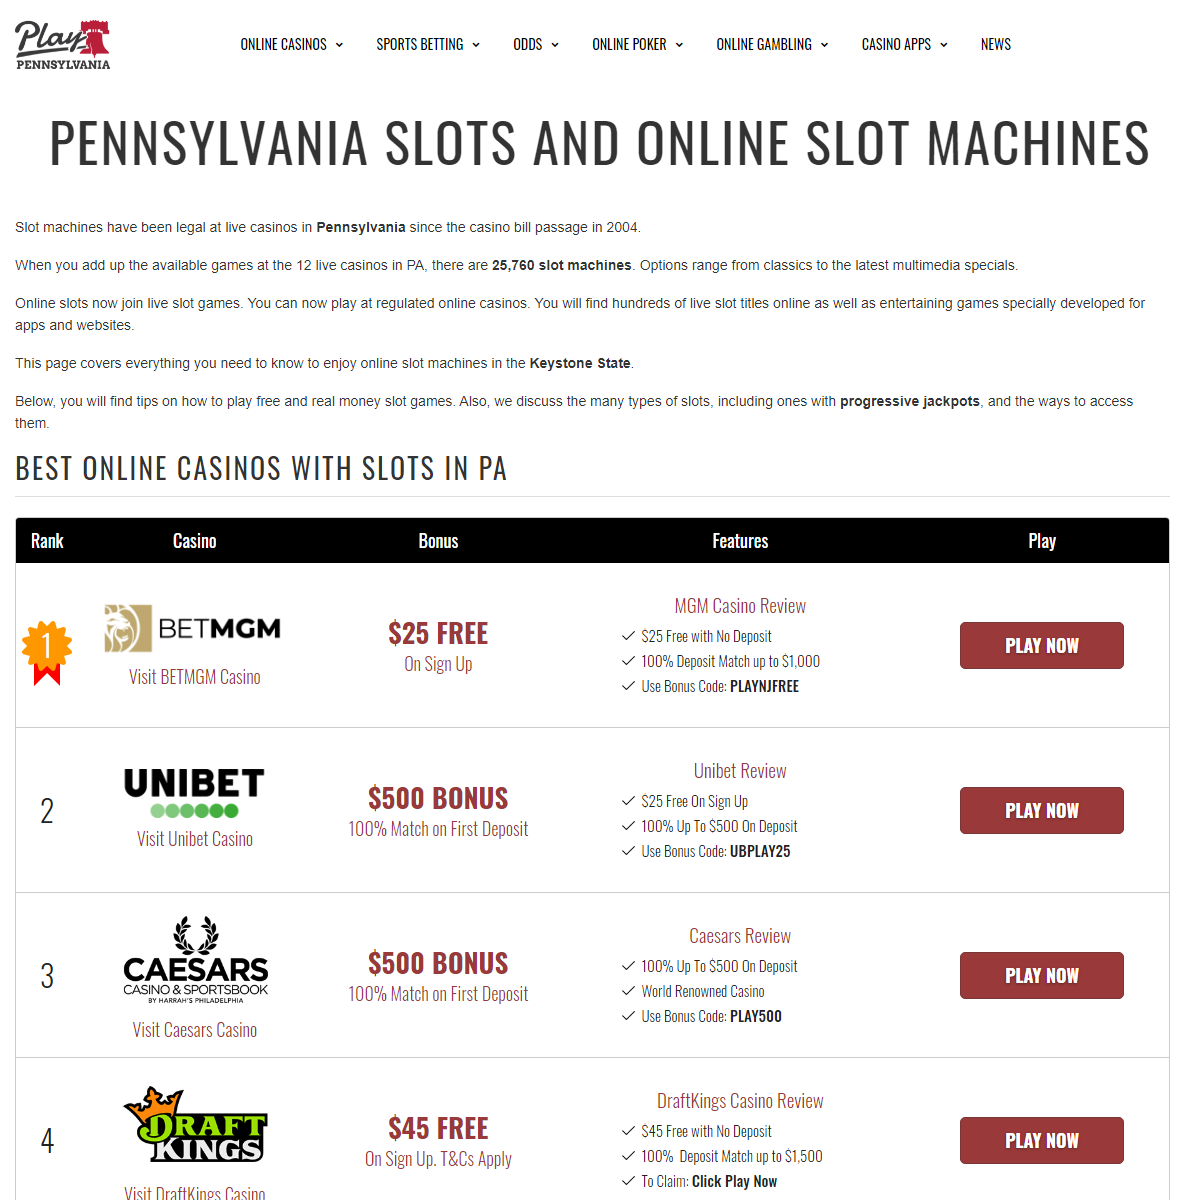 A complete backup of https://www.playpennsylvania.com/slots/